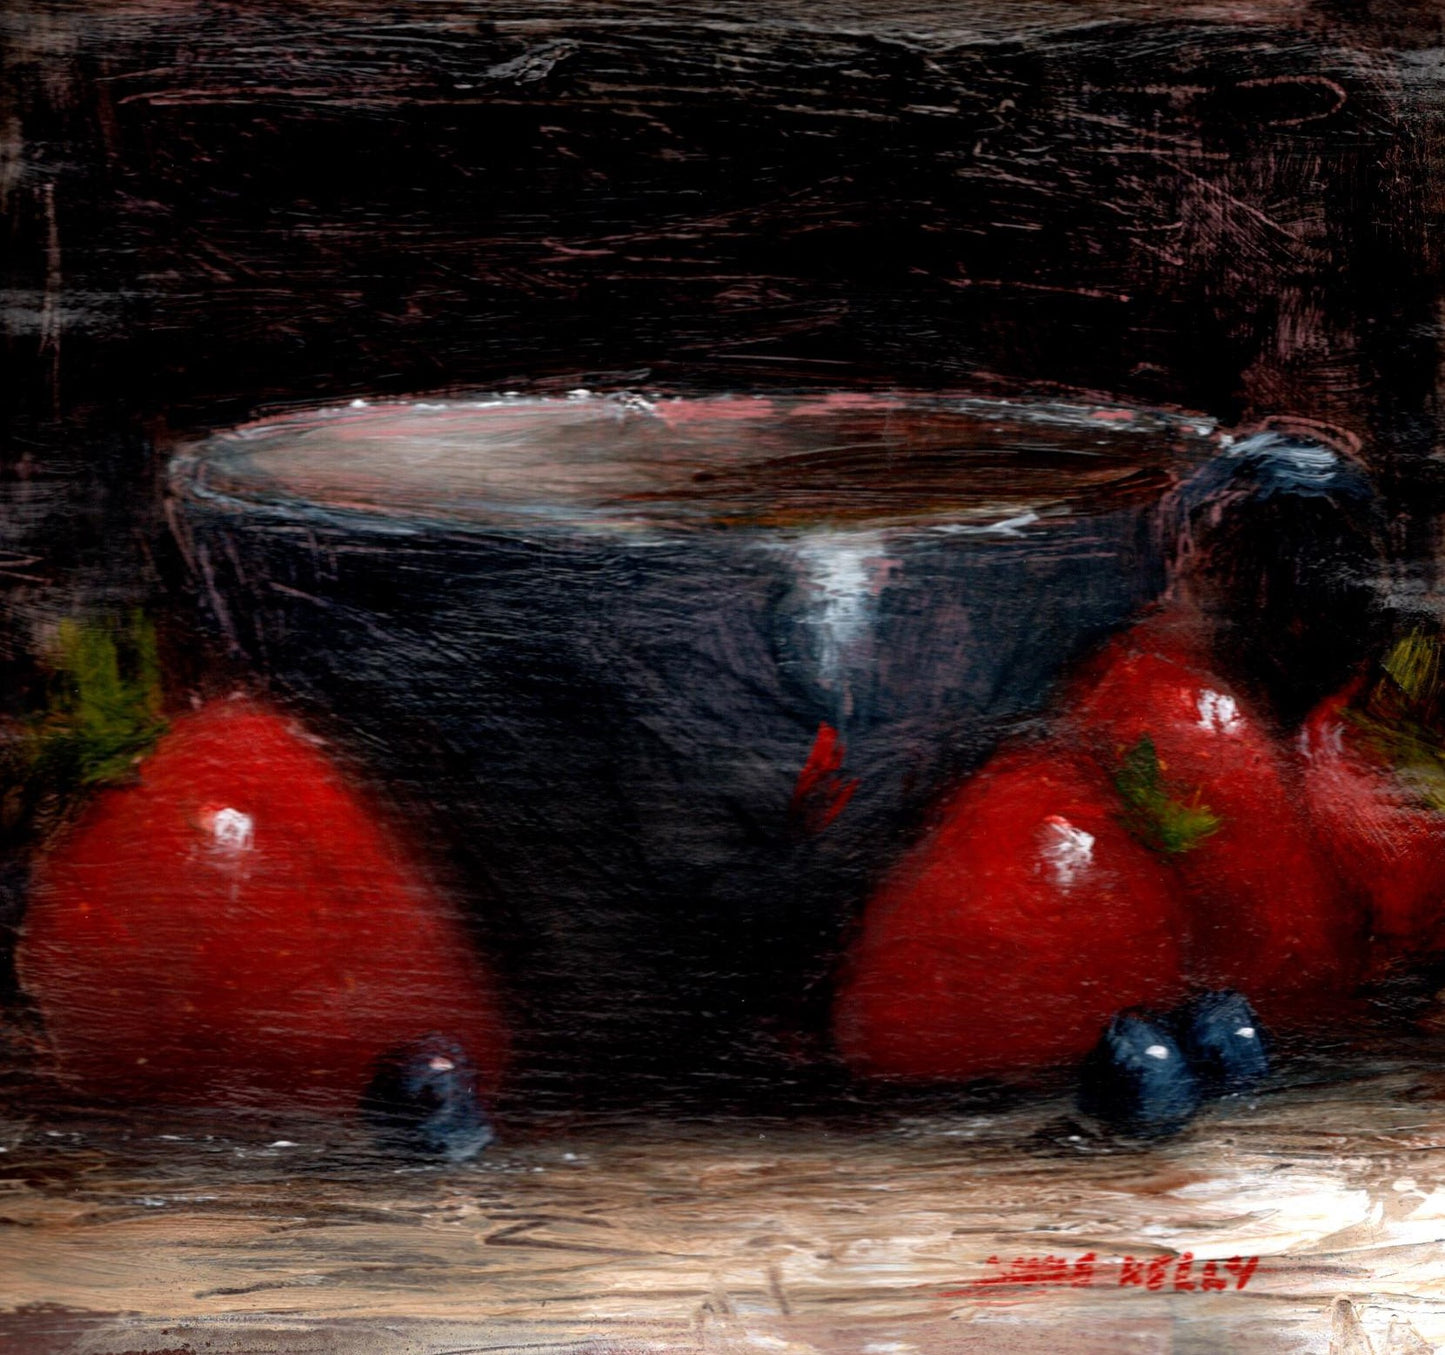 Strawberries and Blue Cup